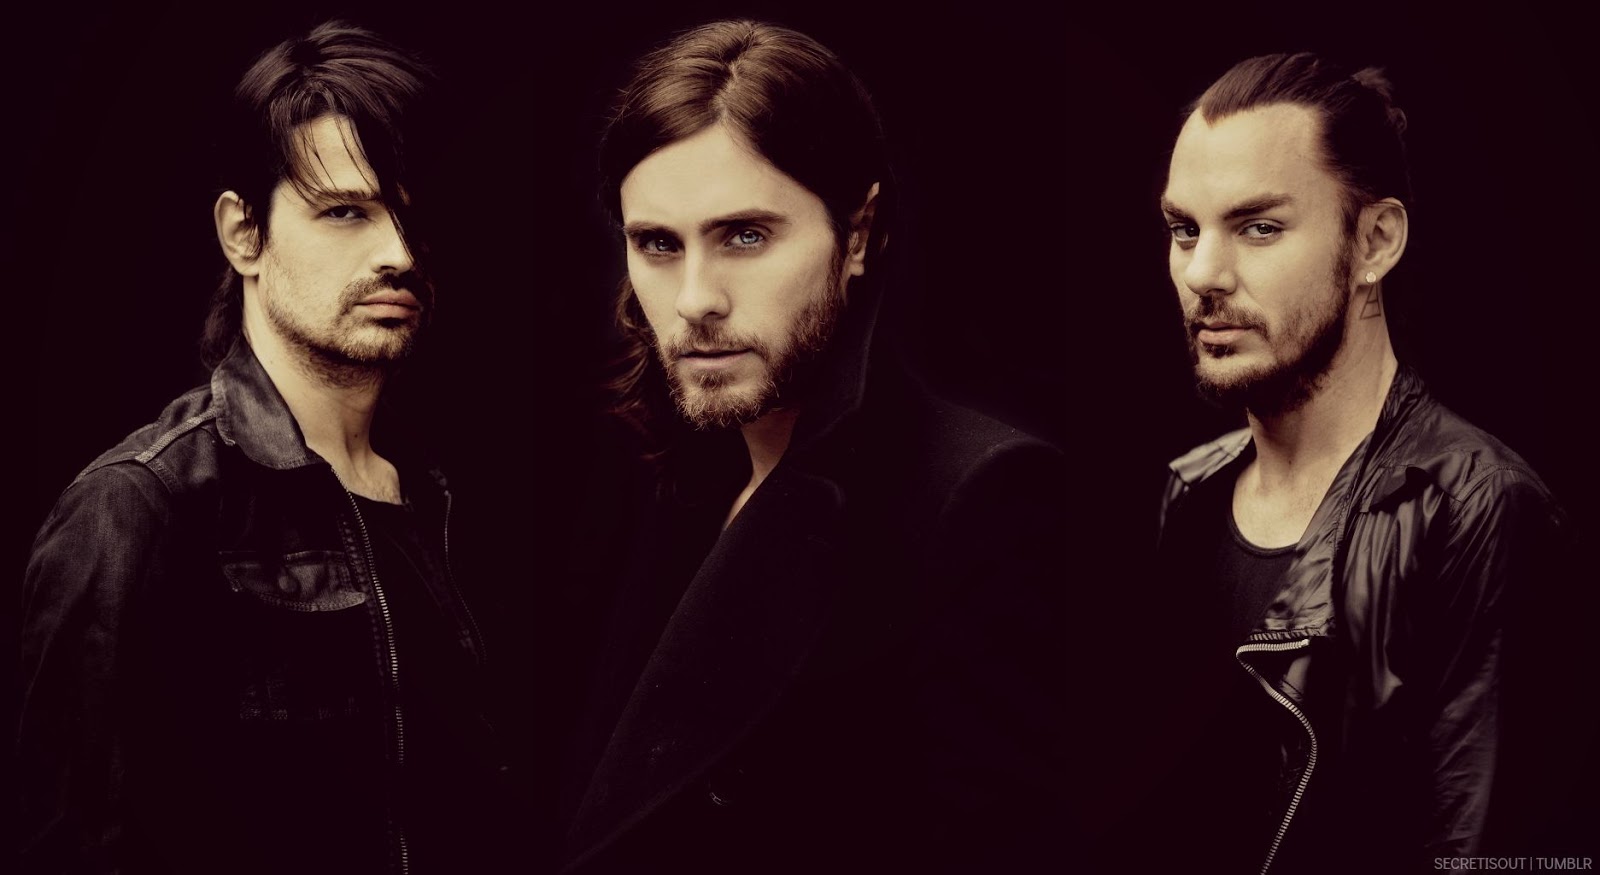 Seasons seconds to mars. 30 Seconds to Mars. Группа Thirty seconds to Mars. 30 Seconds to Mars Казань 2014. Солон Бикслер 30 seconds to Mars.